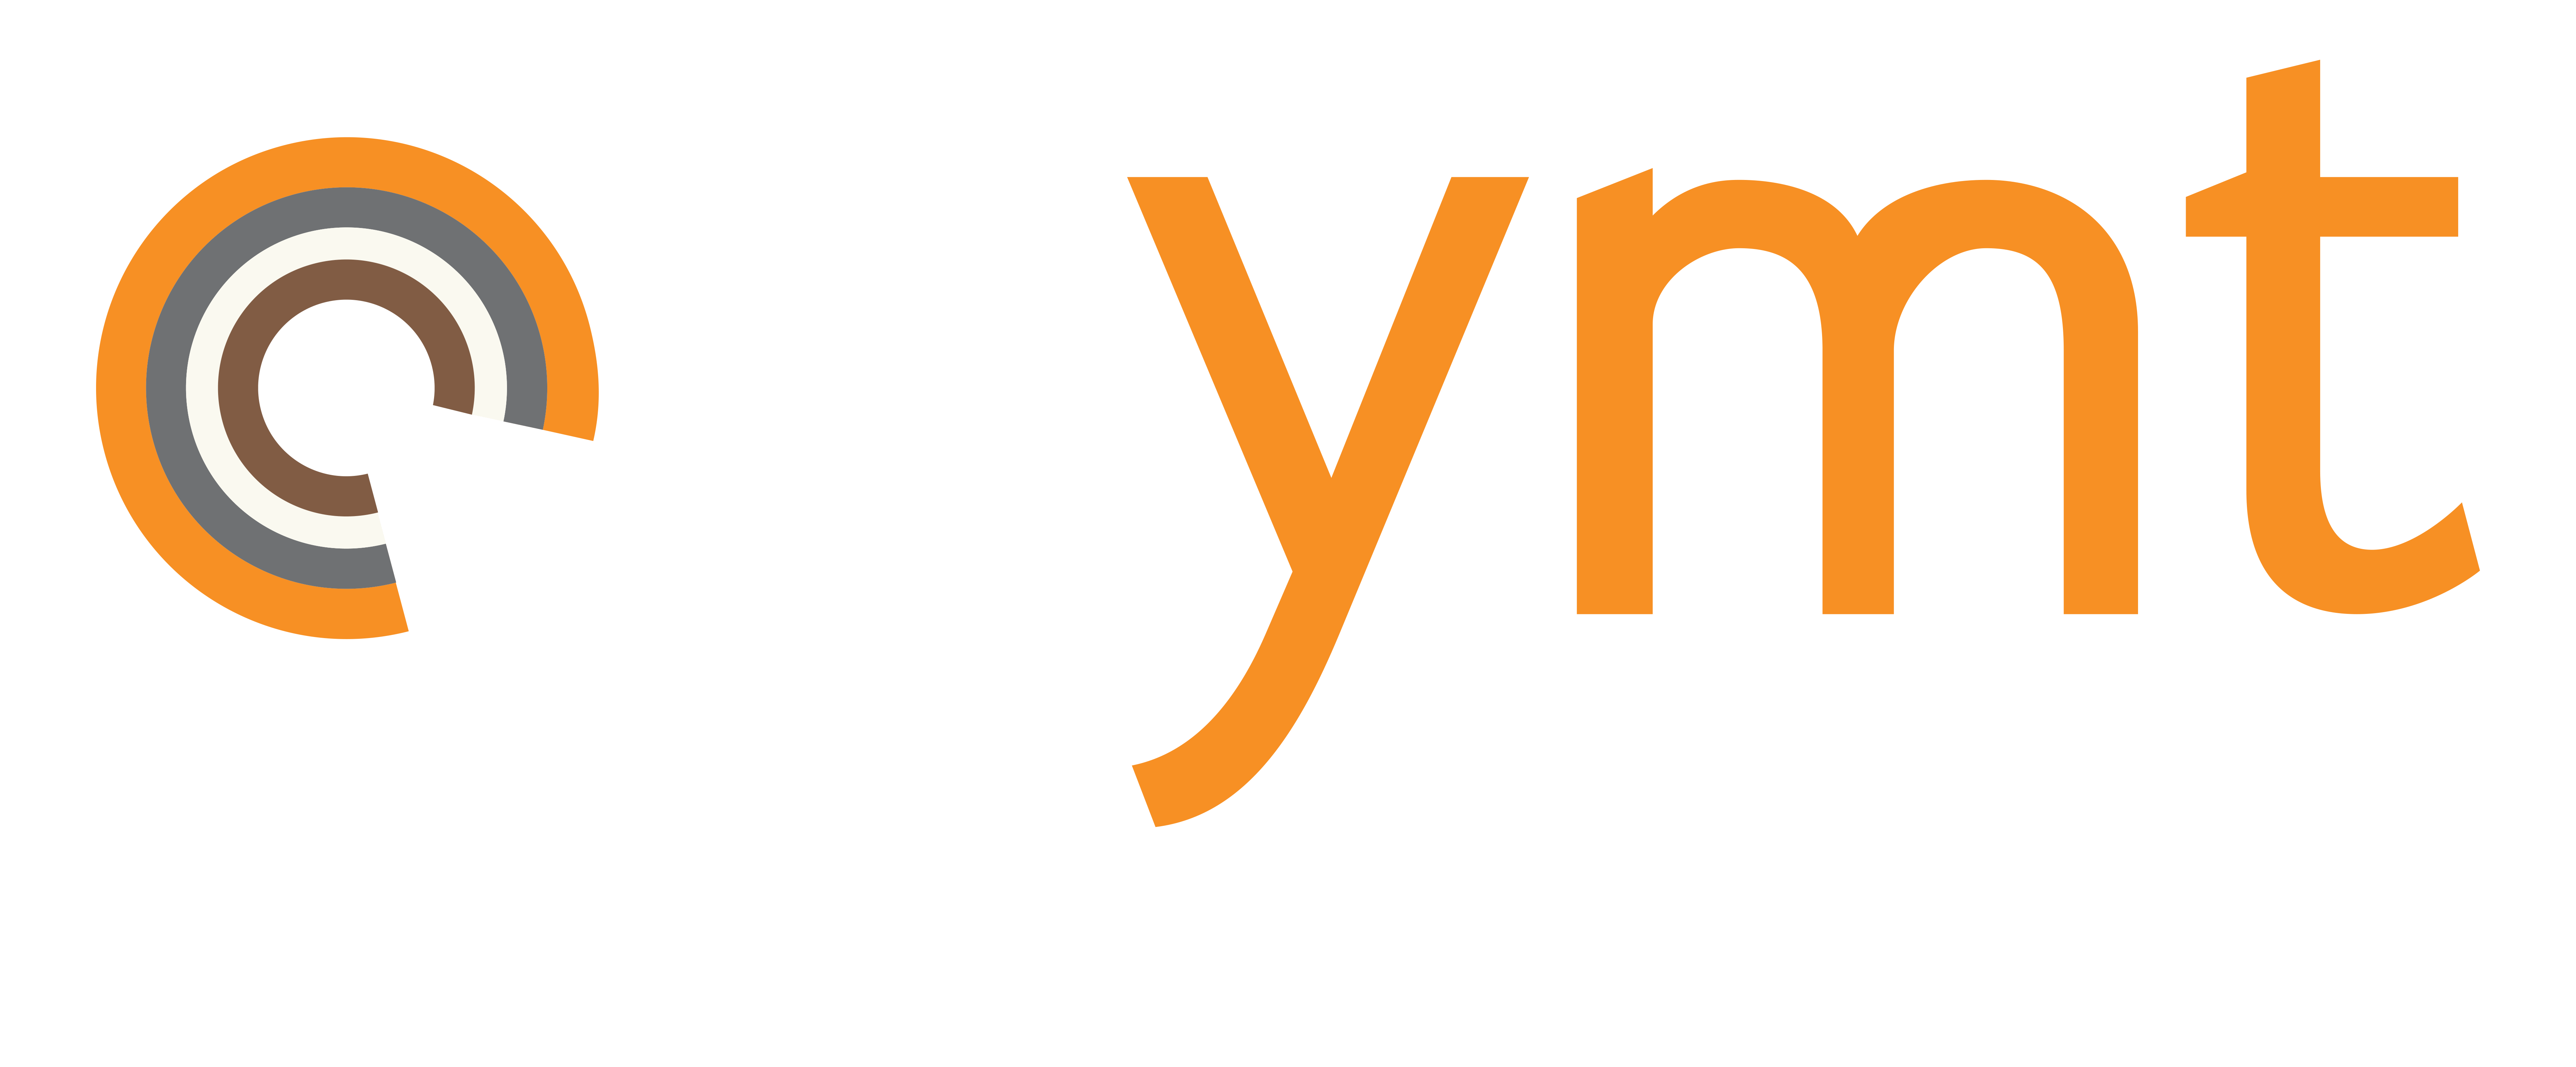 Orange Ministry Logo - CYMT – Invest in Youth